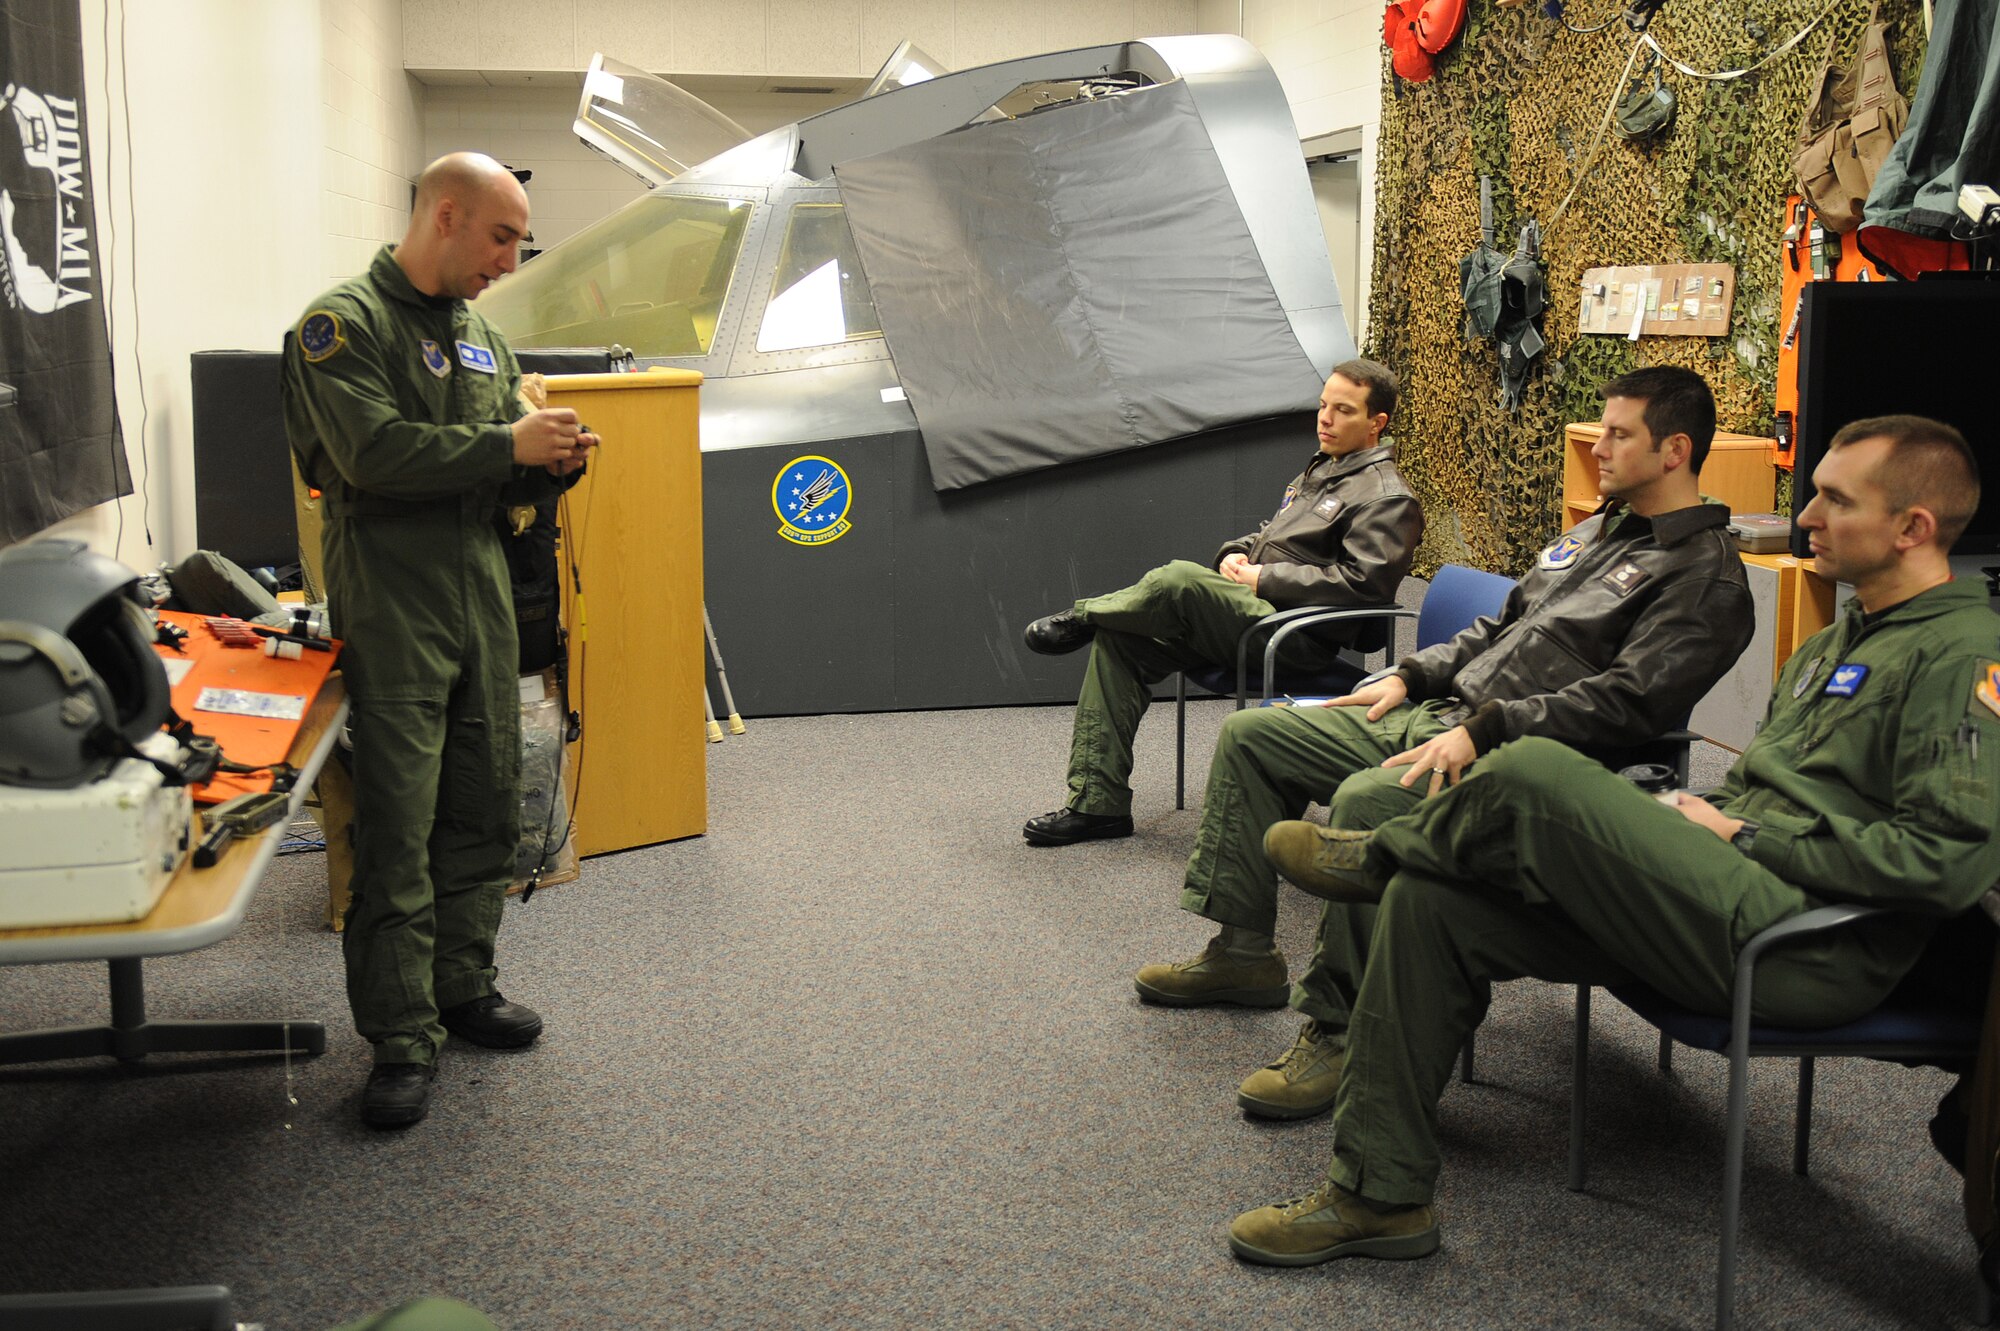 WHITEMAN AIR FORCE BASE, Mo. - Staff Sgt. Michael Garcia, 509th Operation Support Squadron survival evasion resistance escape specialist, instructs 509th Bomb Wing aircrew on proper care and use for survival equipment. (U.S. Air Force photo by Staff Sgt. Jason Huddleston) (Released)